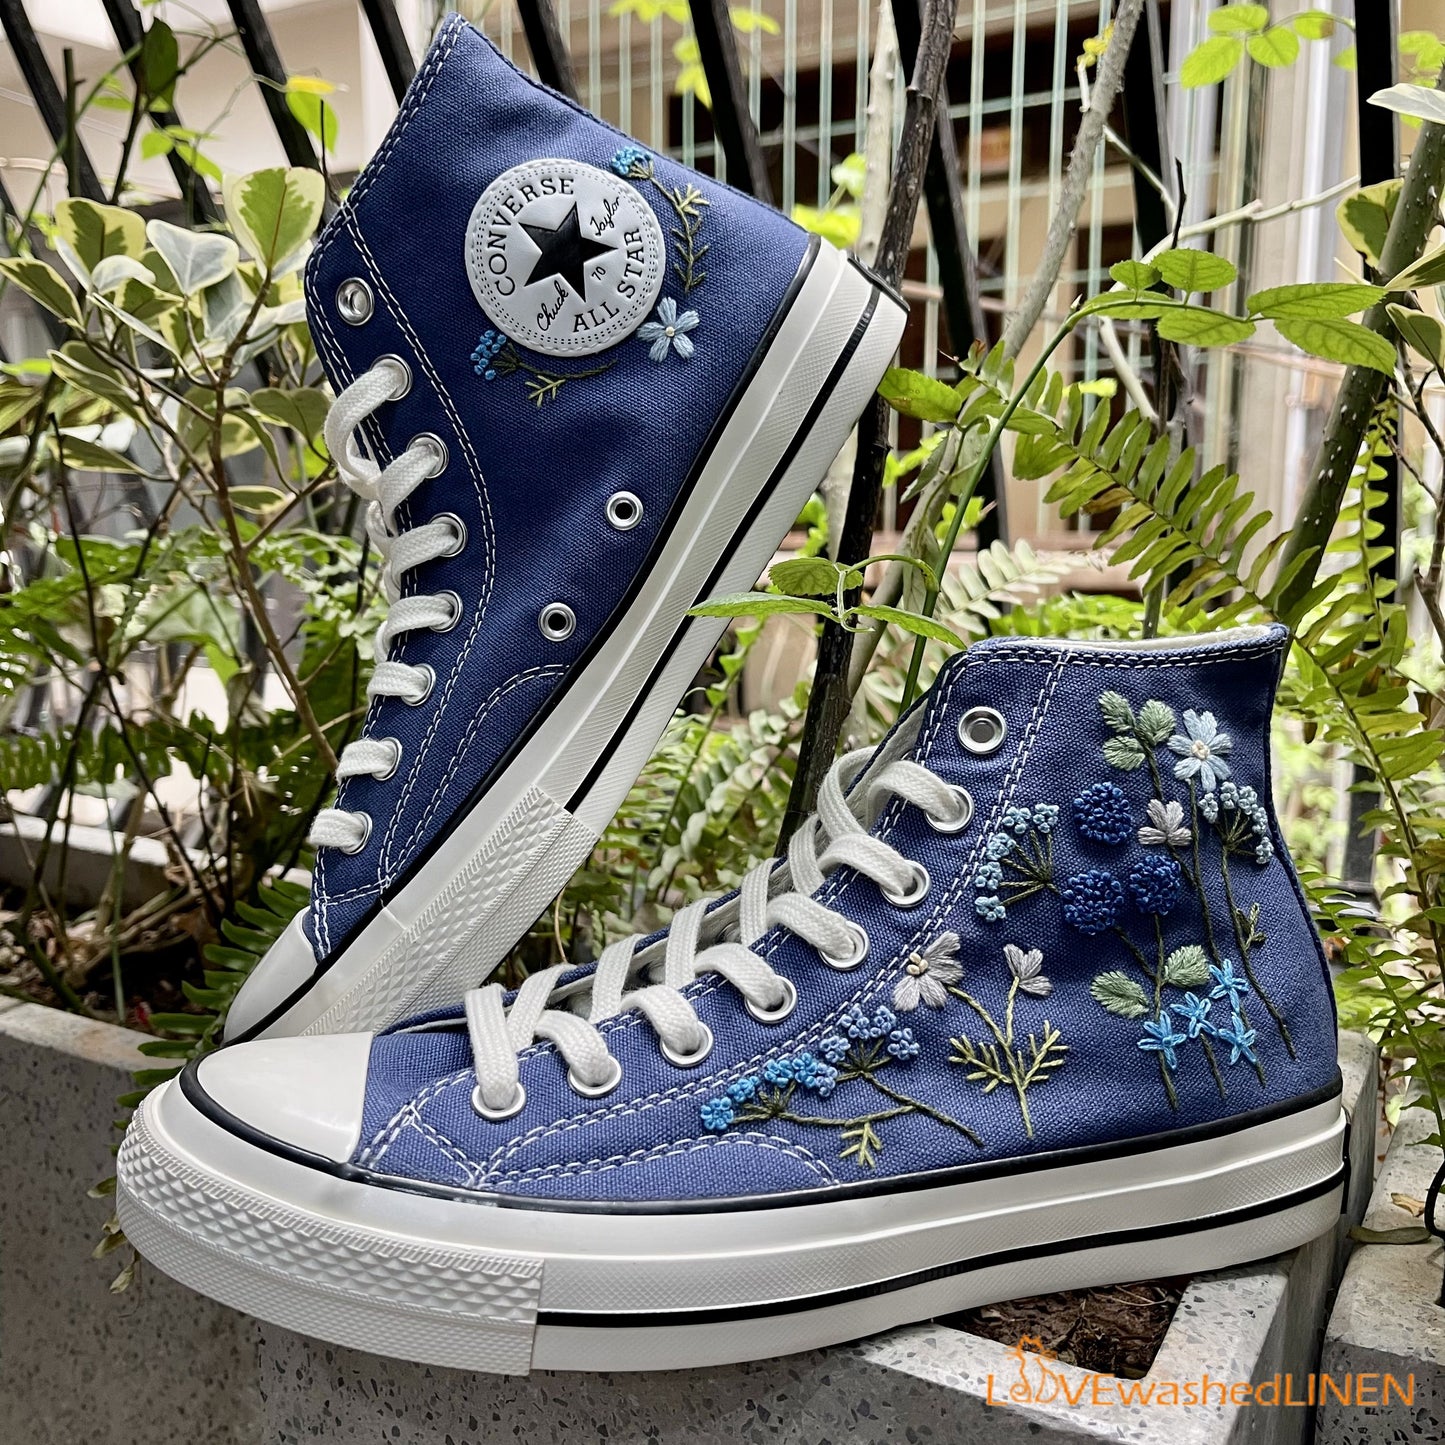 Embroidered Converse/bridal Converse/embroidered Sneakers Logo